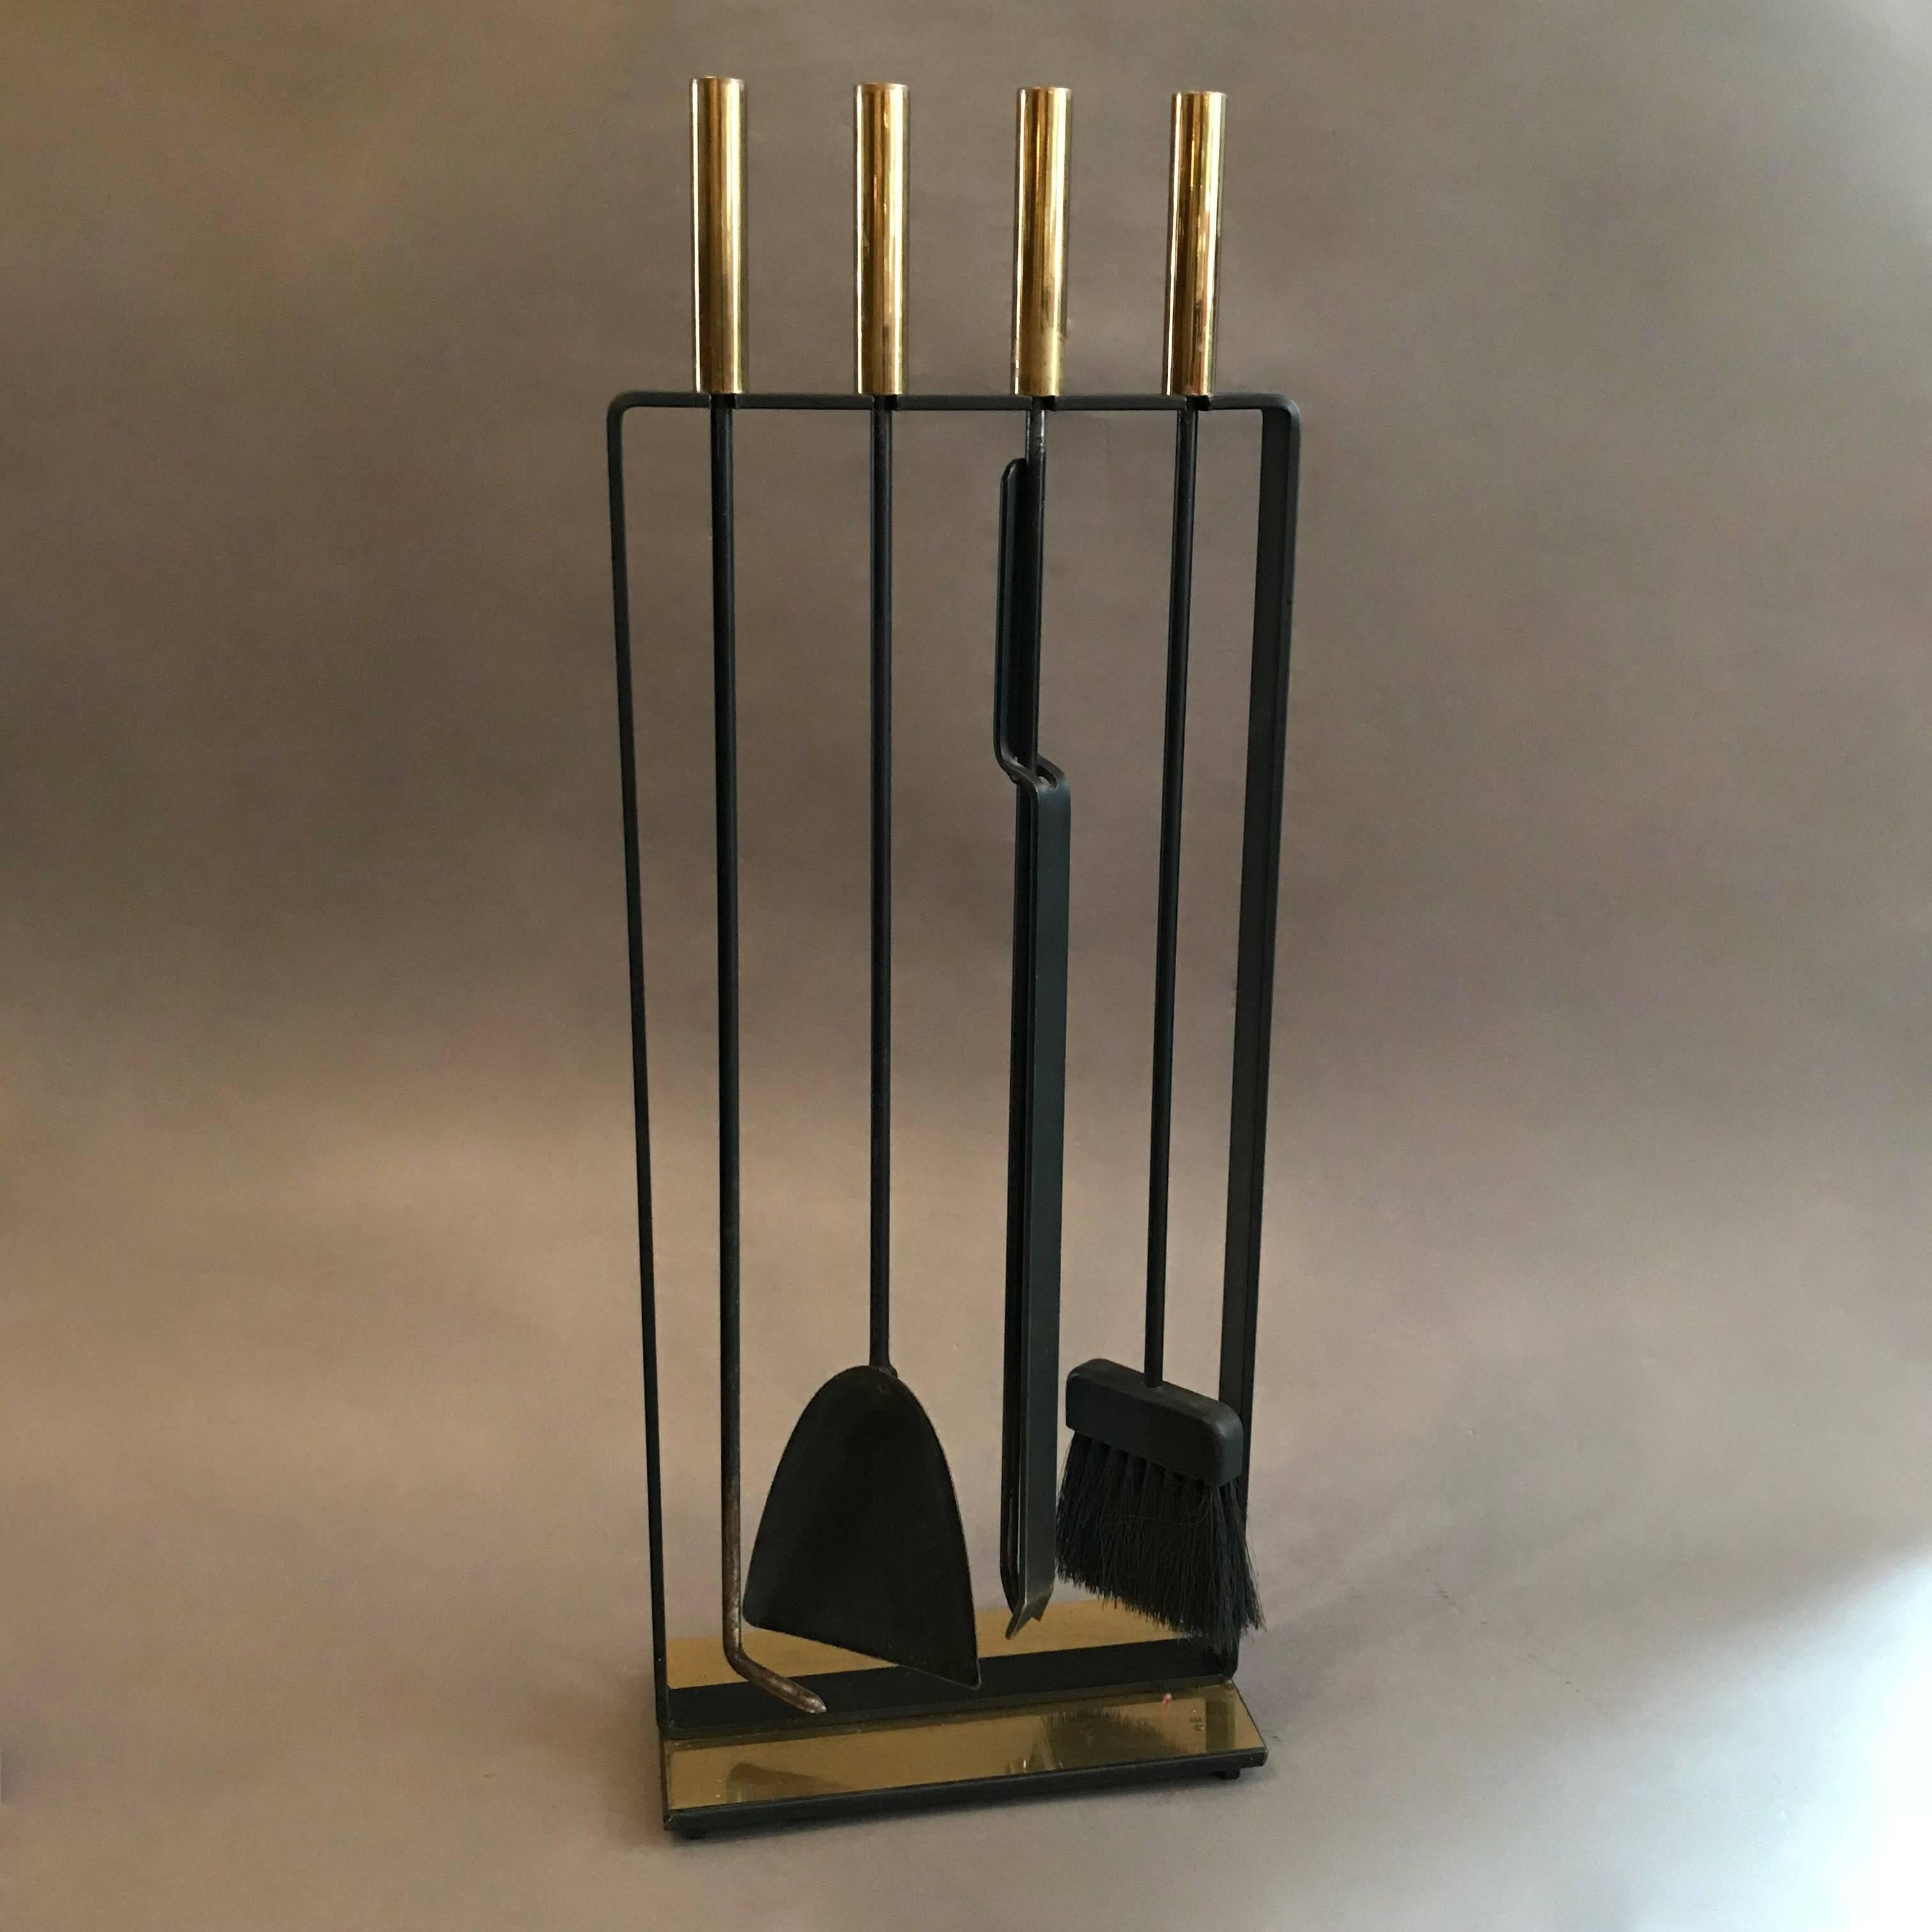 Modernist, four-piece, fireplace tool set by Pilgrim attributed to George Nelson features black wrought iron frame and tools with polished brass handles and base.